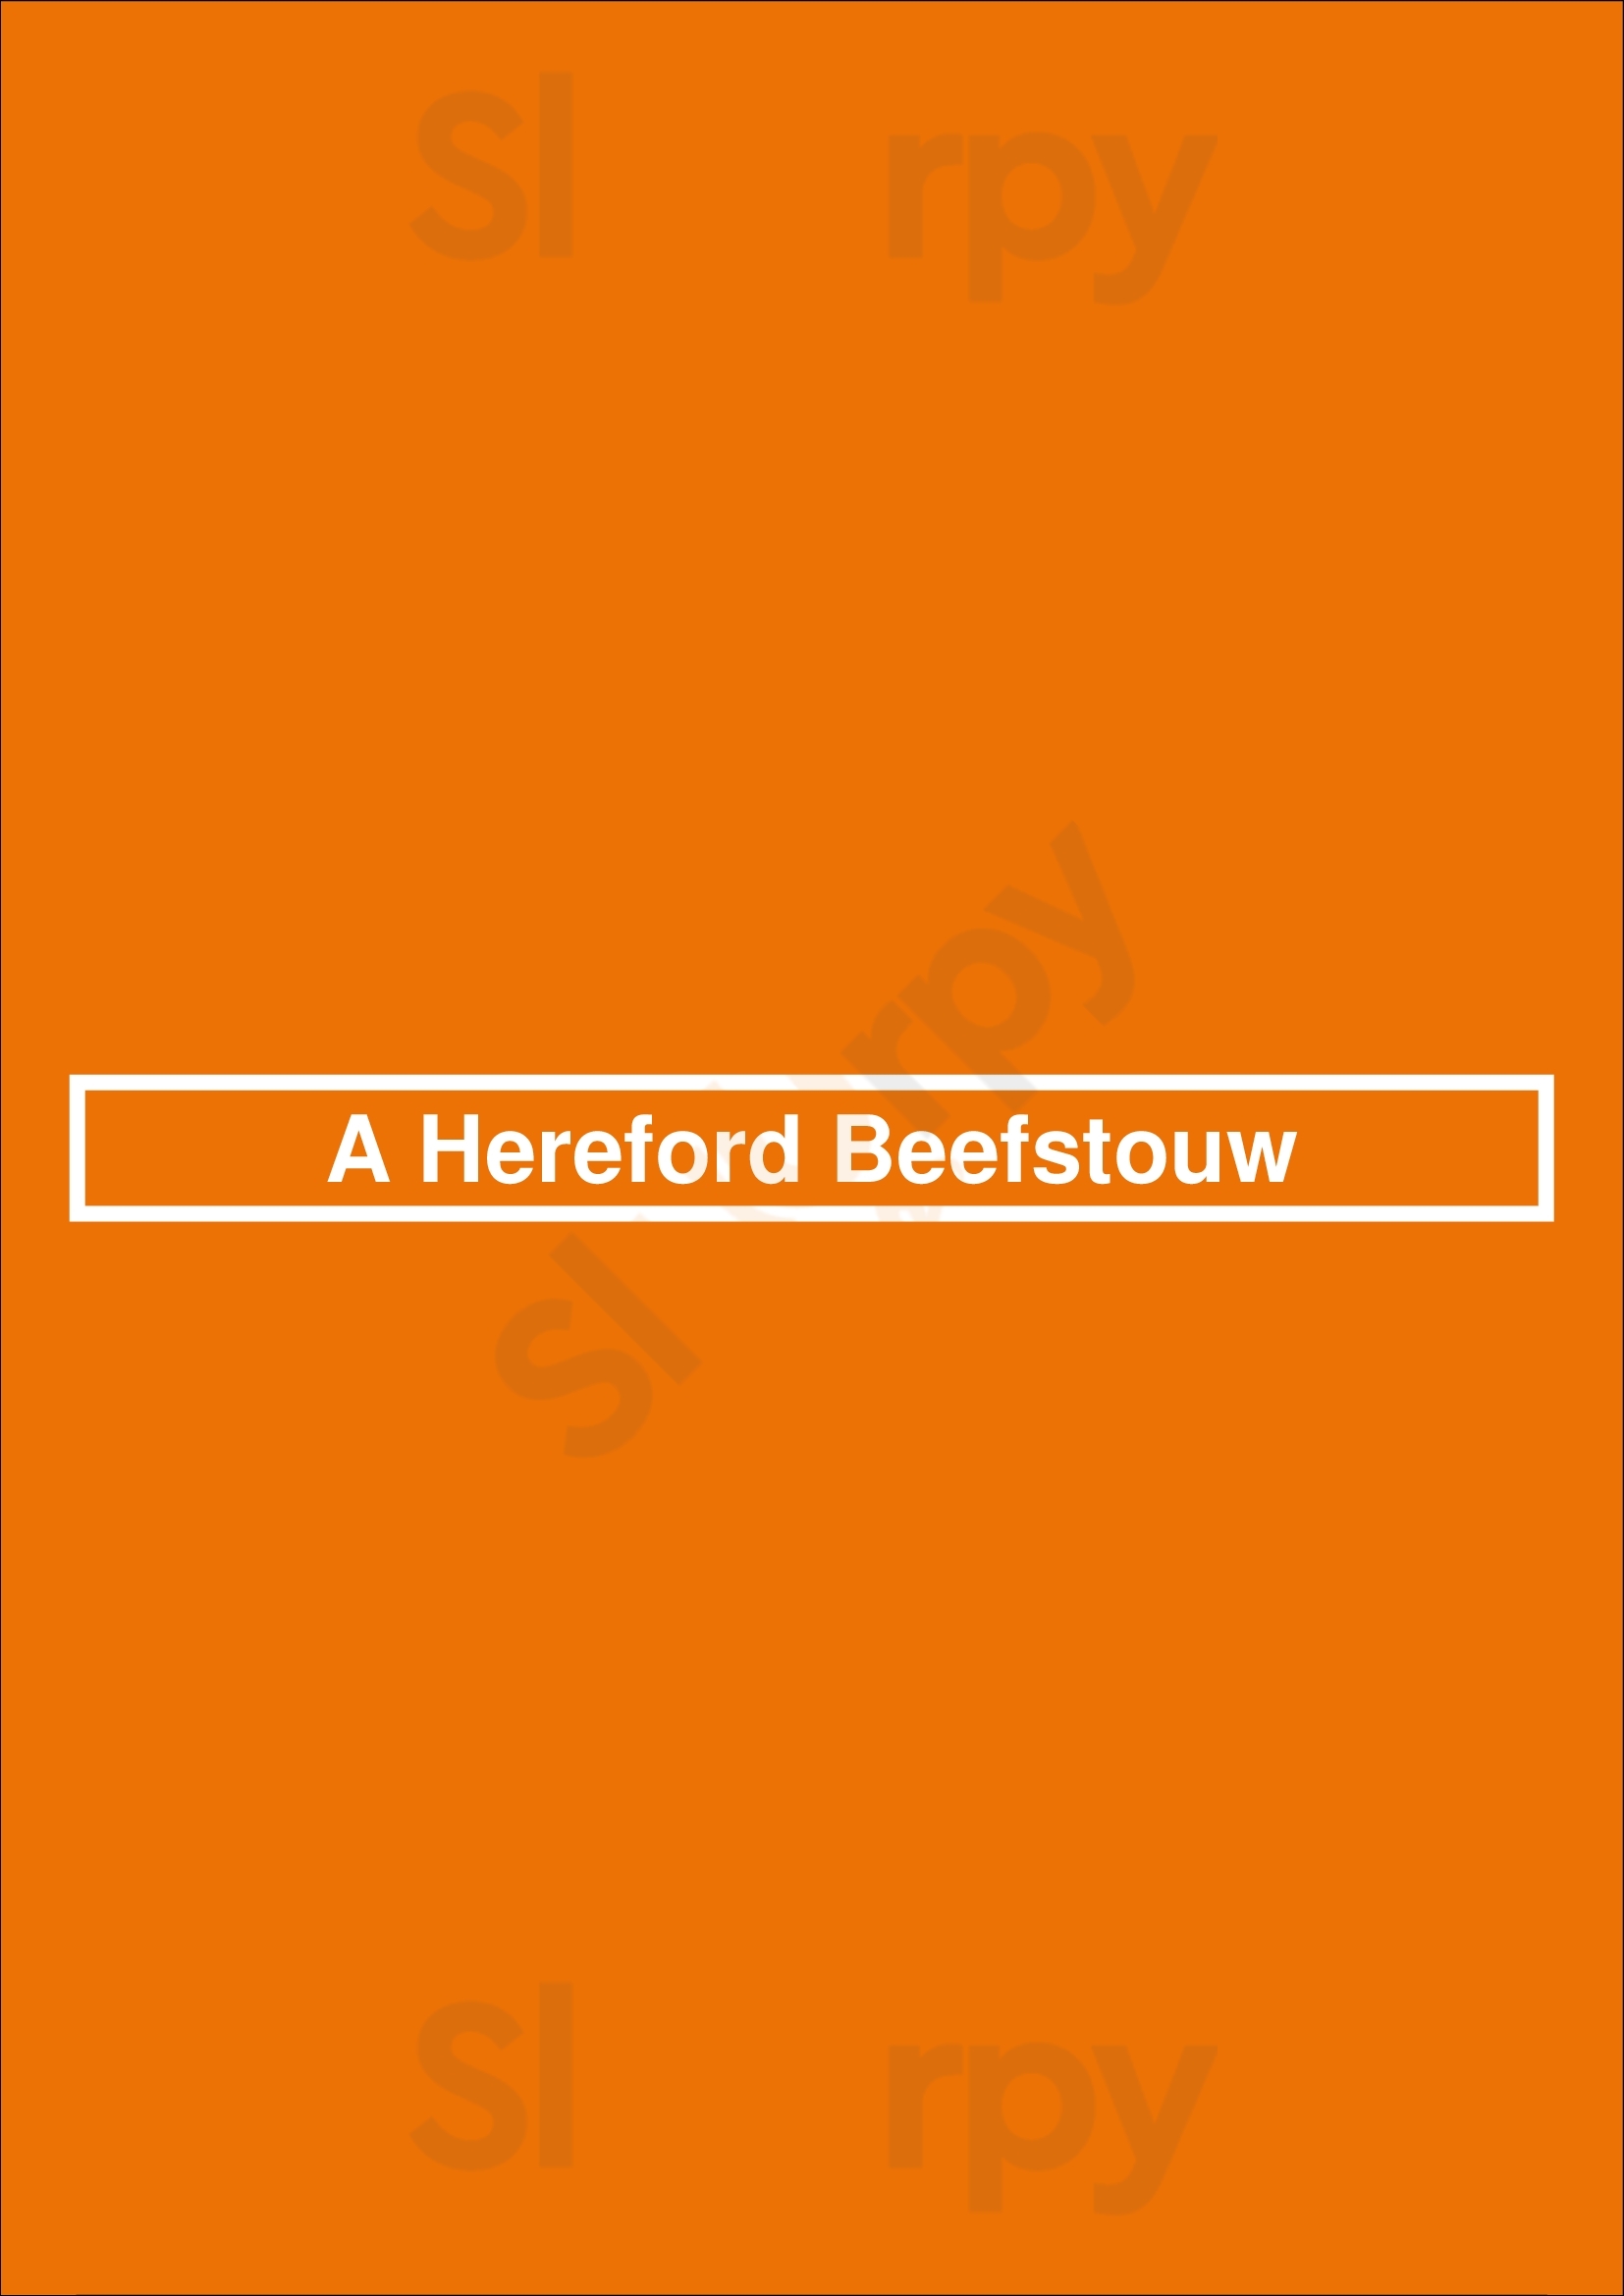 A Hereford Beefstouw Adelaide Menu - 1